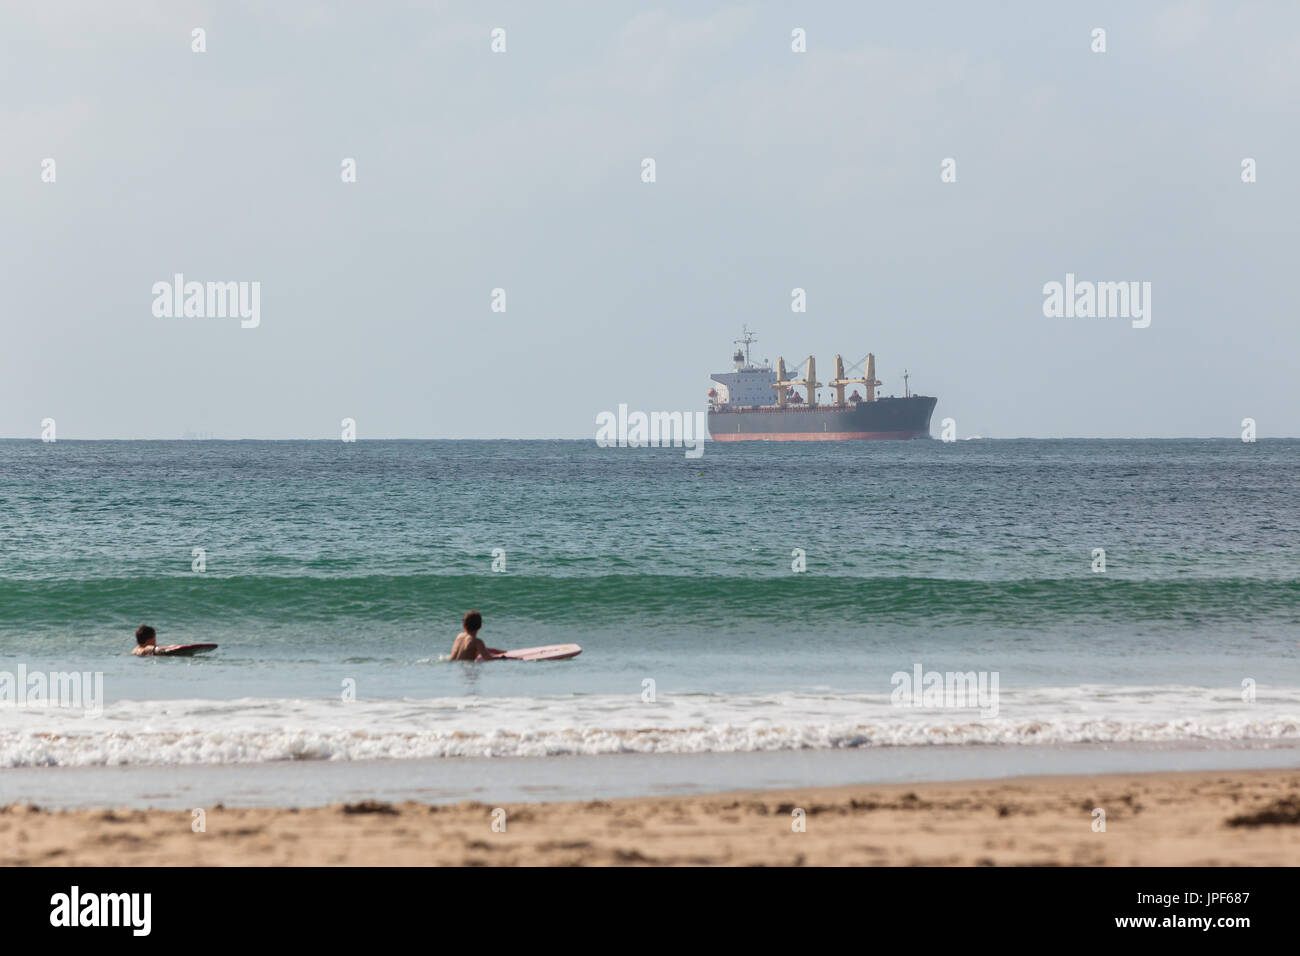 Ocean ship enters port closeby beach with young unidentified boys swimming bodyboarding waves. Stock Photo